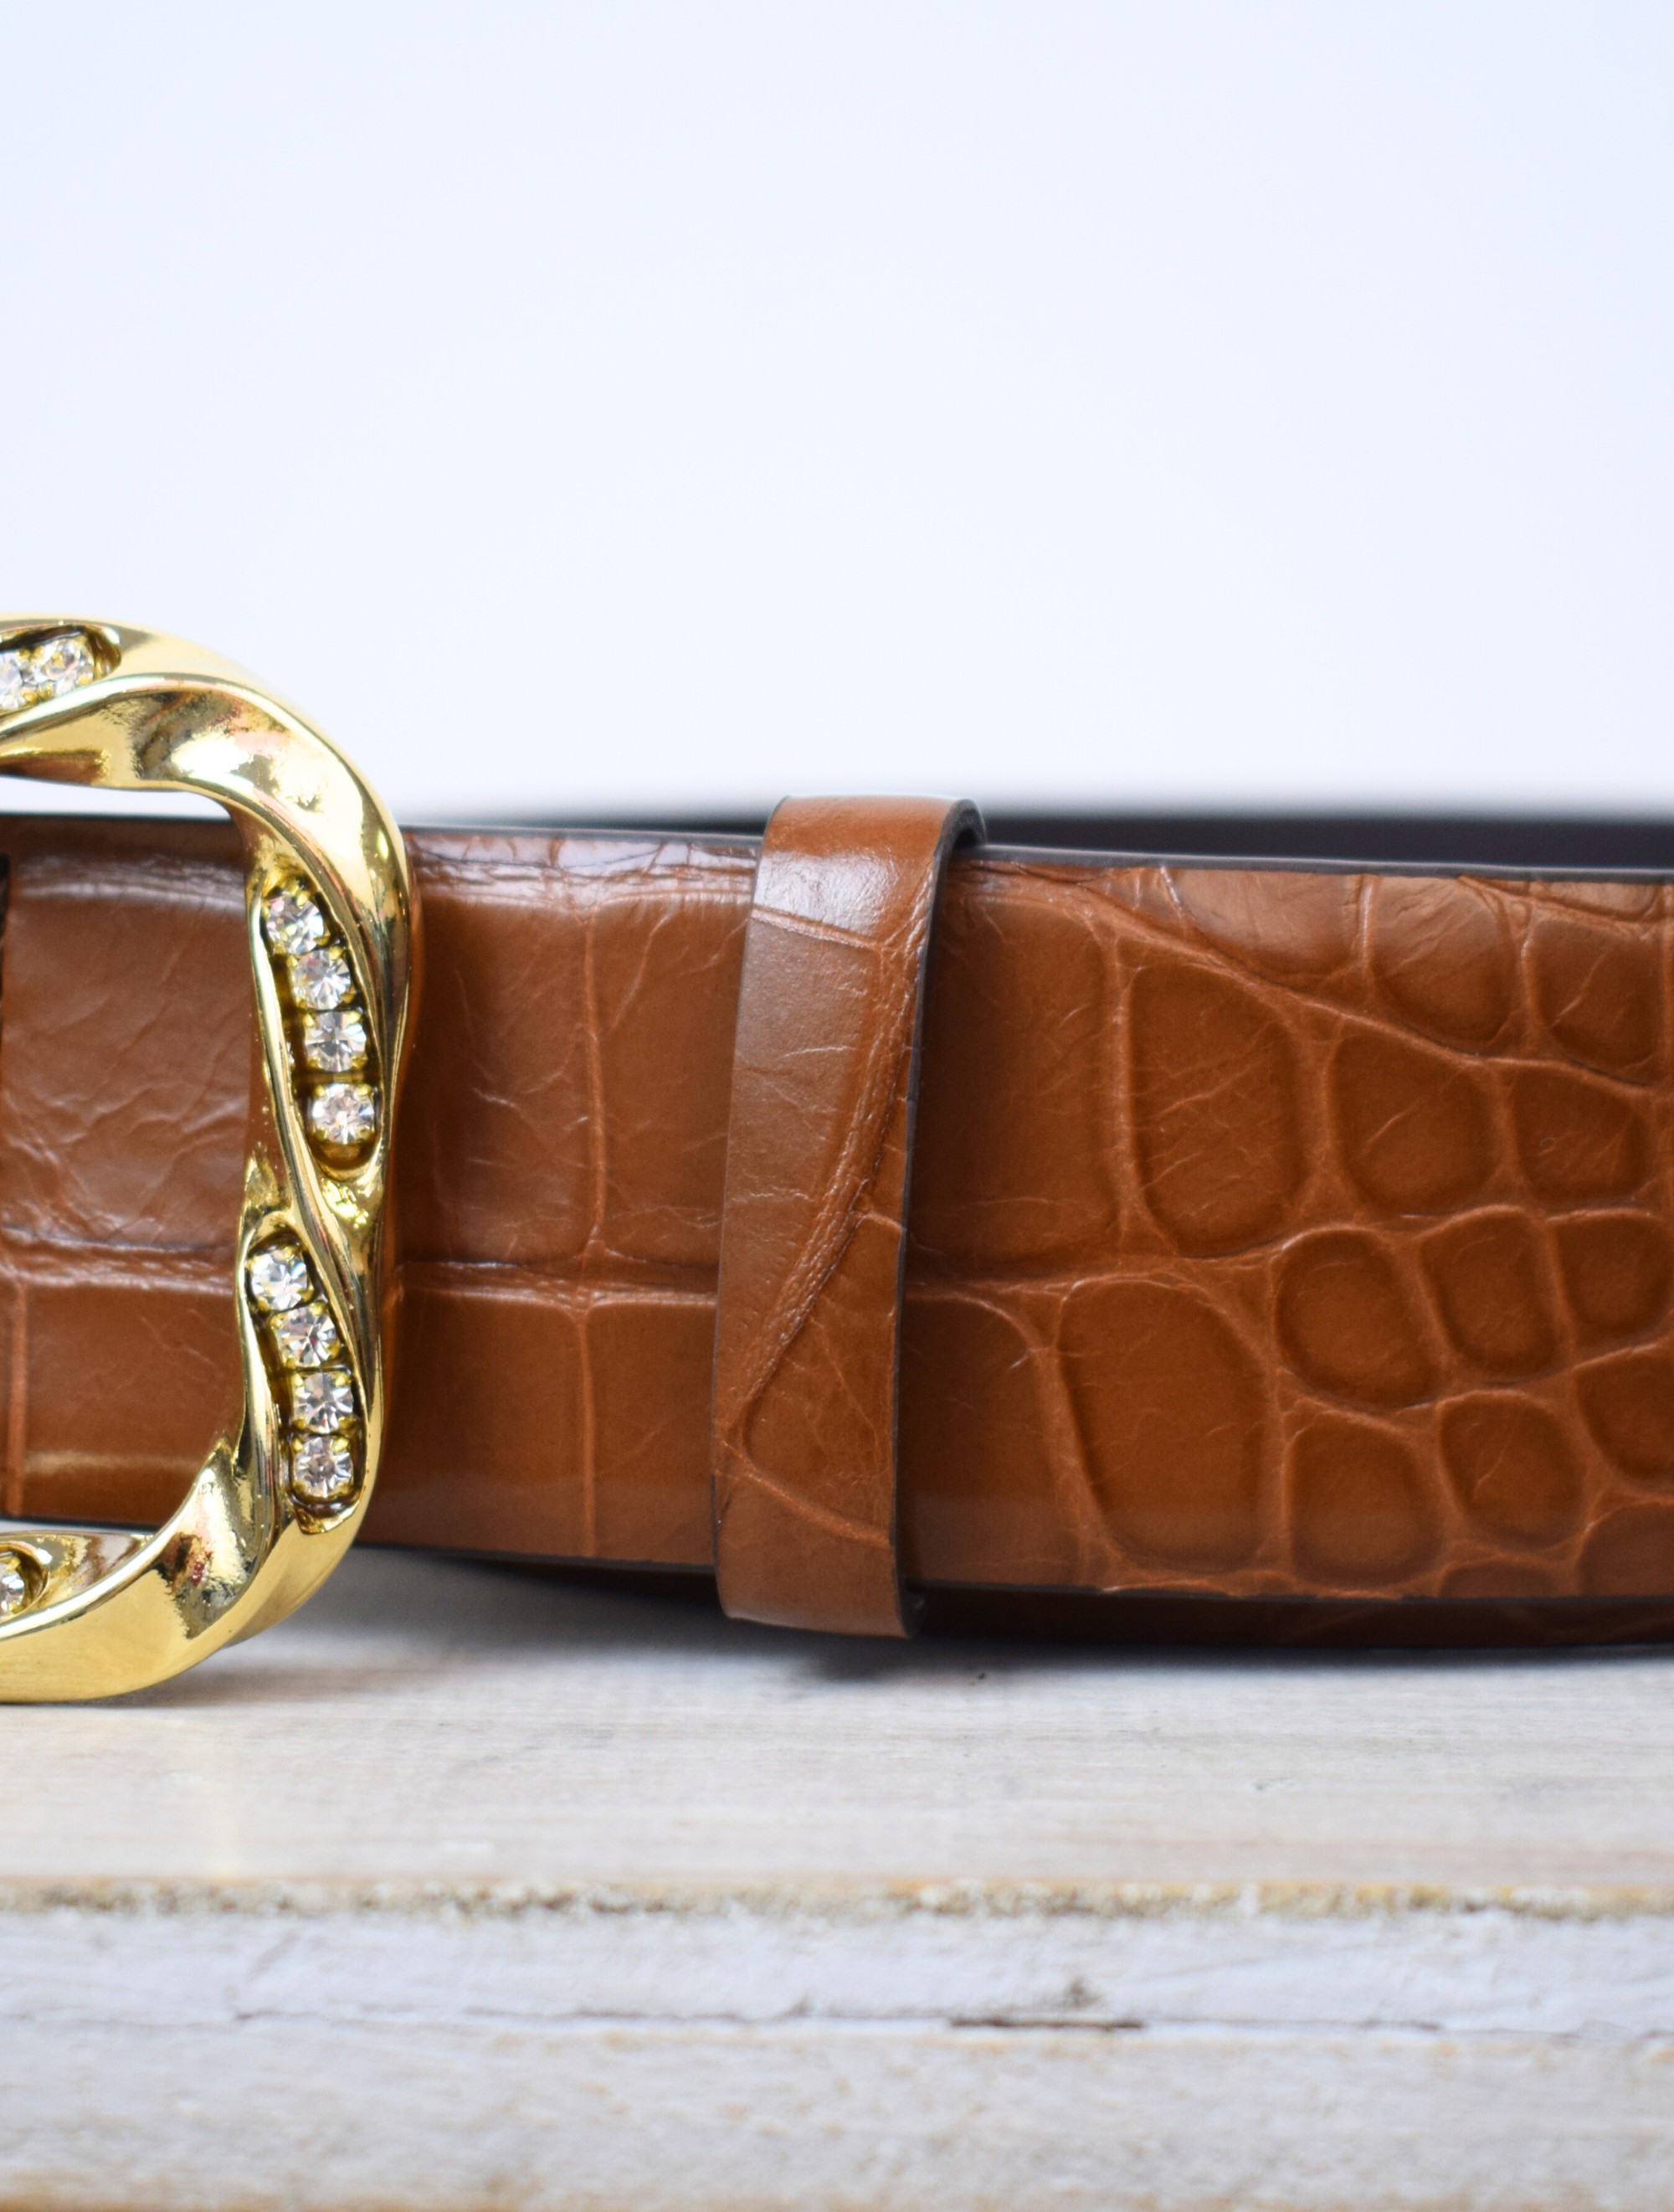 Wide mock croc tan leather belt with large gold metallic and bejewelled oblong buckle